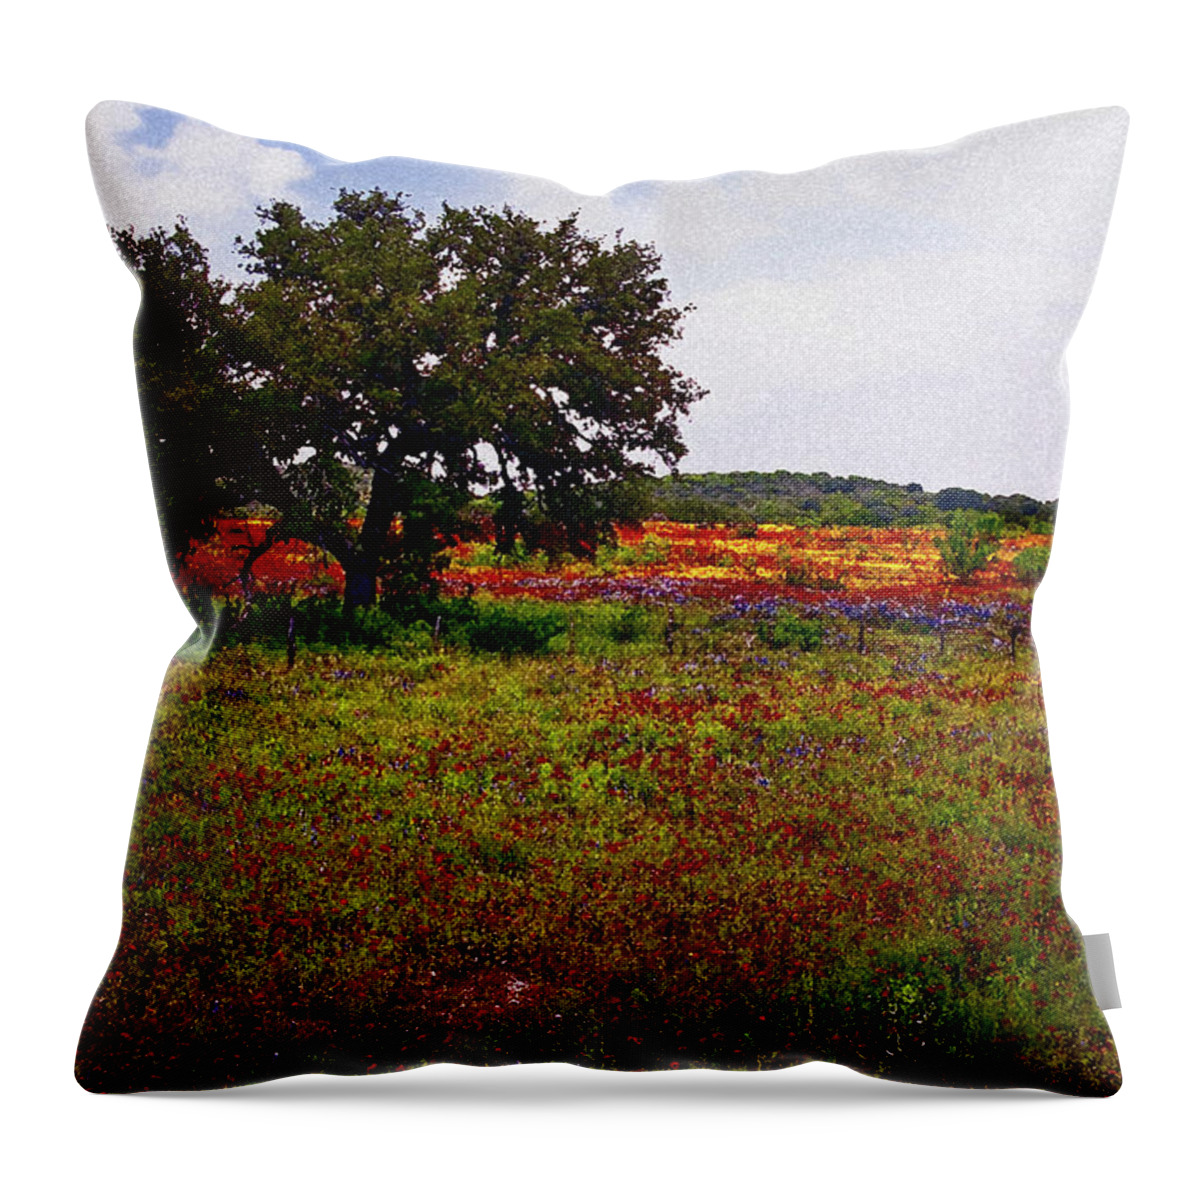 Texas Throw Pillow featuring the photograph Texas Wildflowers by Tamyra Ayles